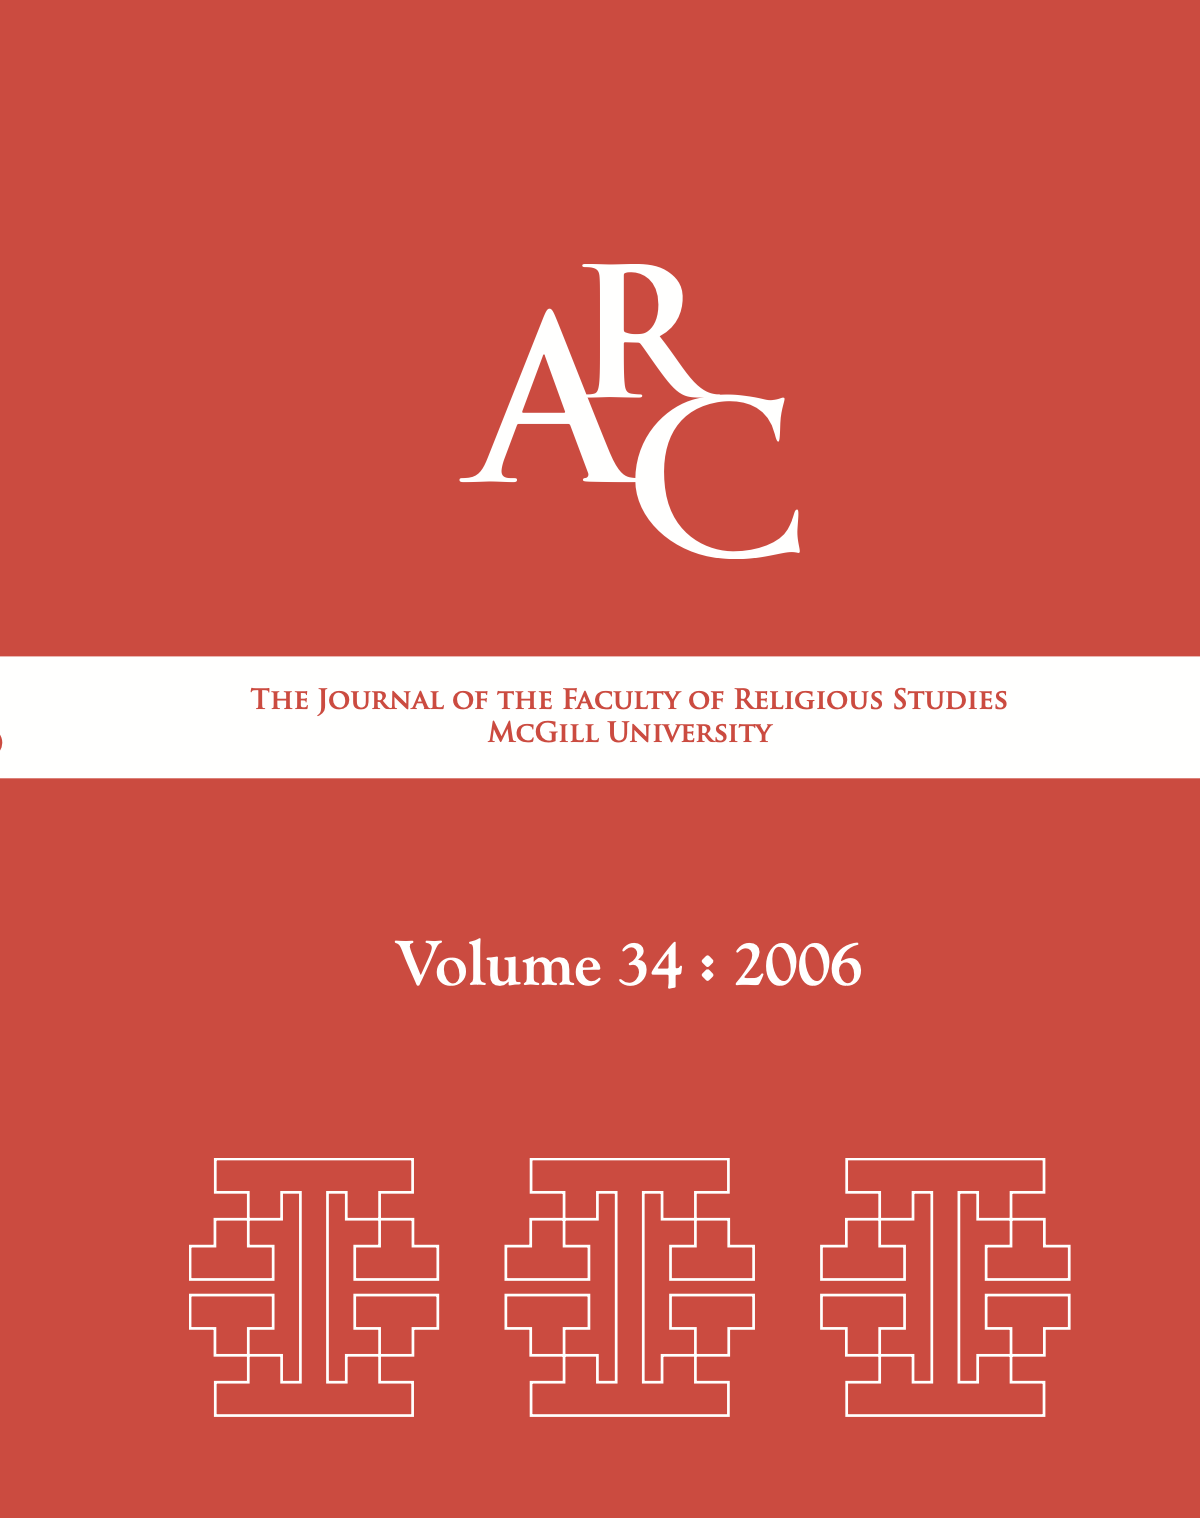 					View Vol. 34 (2006): Arc: The Journal of the Faculty of Religious Studies
				